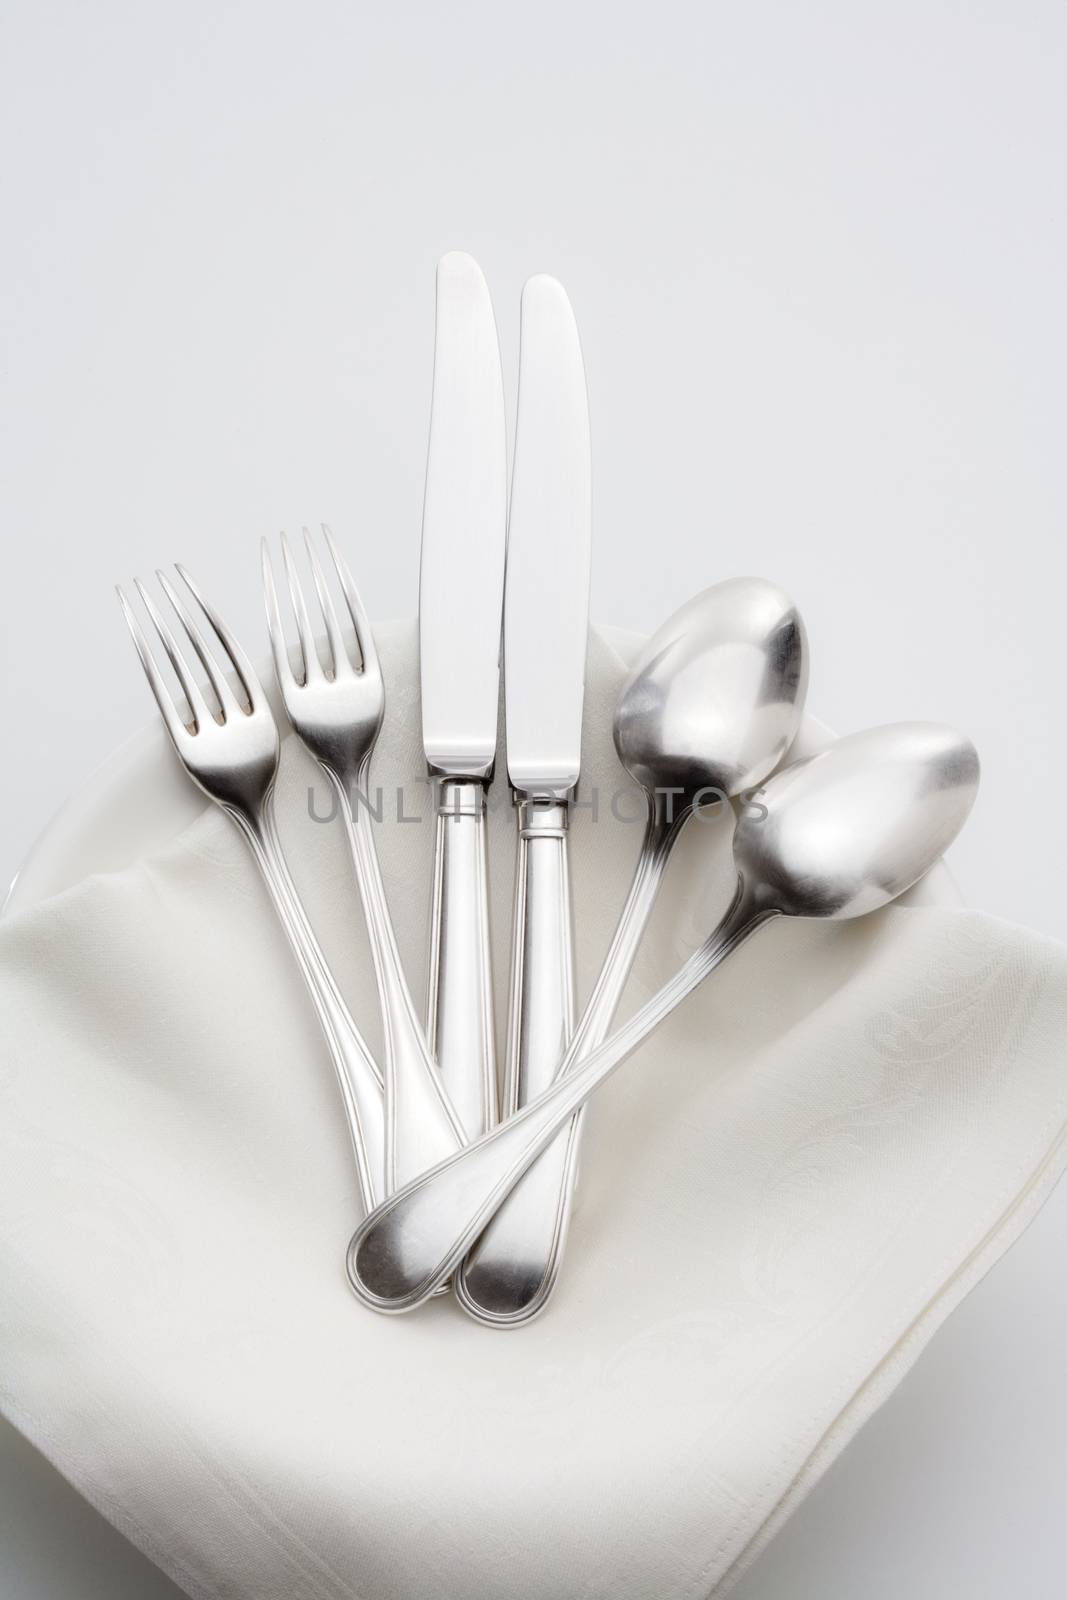 elegant silverware on a pile of plates with white cloth